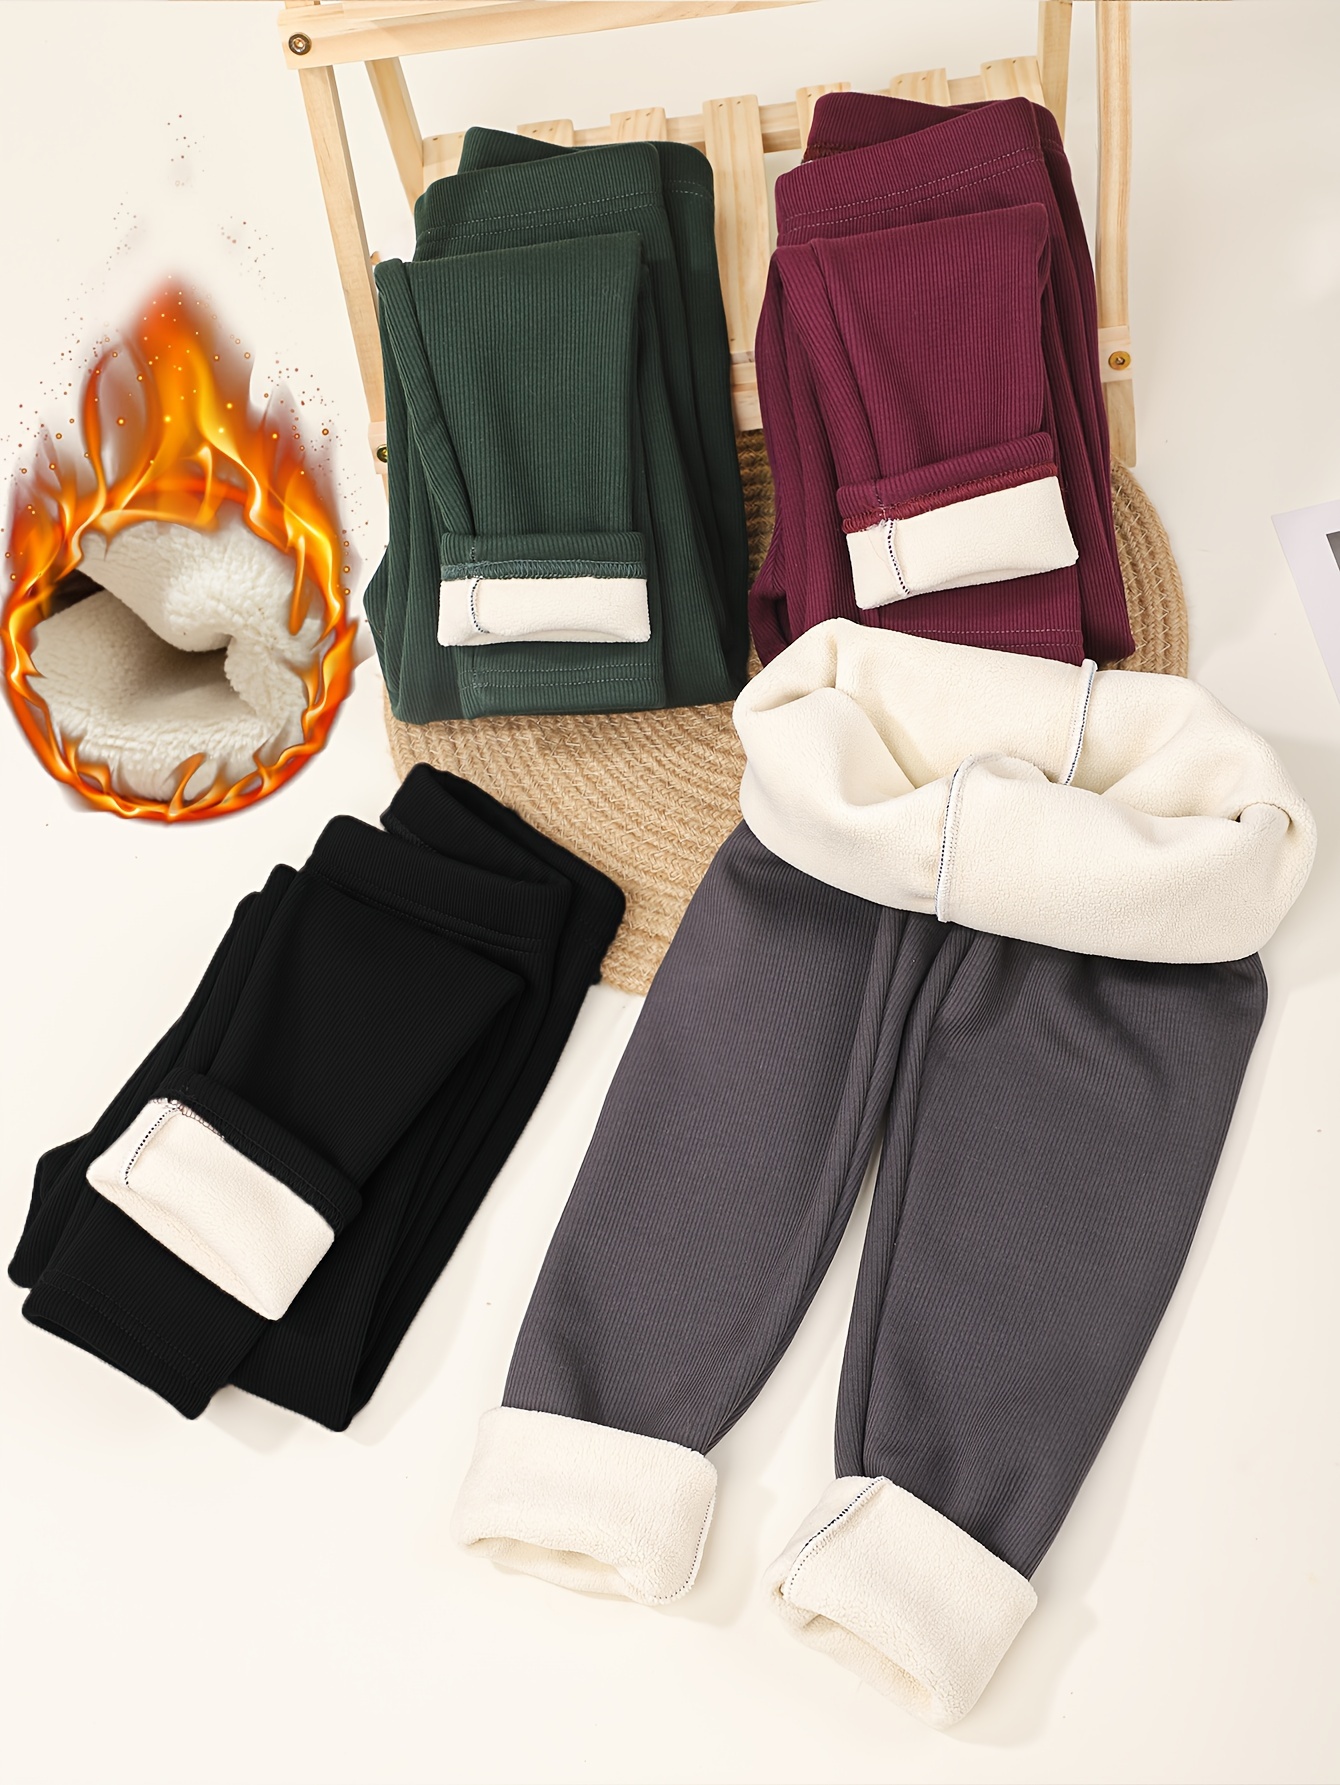 Buy Kids Girls Fleece Lined Leggings Warm Winter Soft Trousers Thick  Thermal Pants at affordable prices — free shipping, real reviews with  photos — Joom